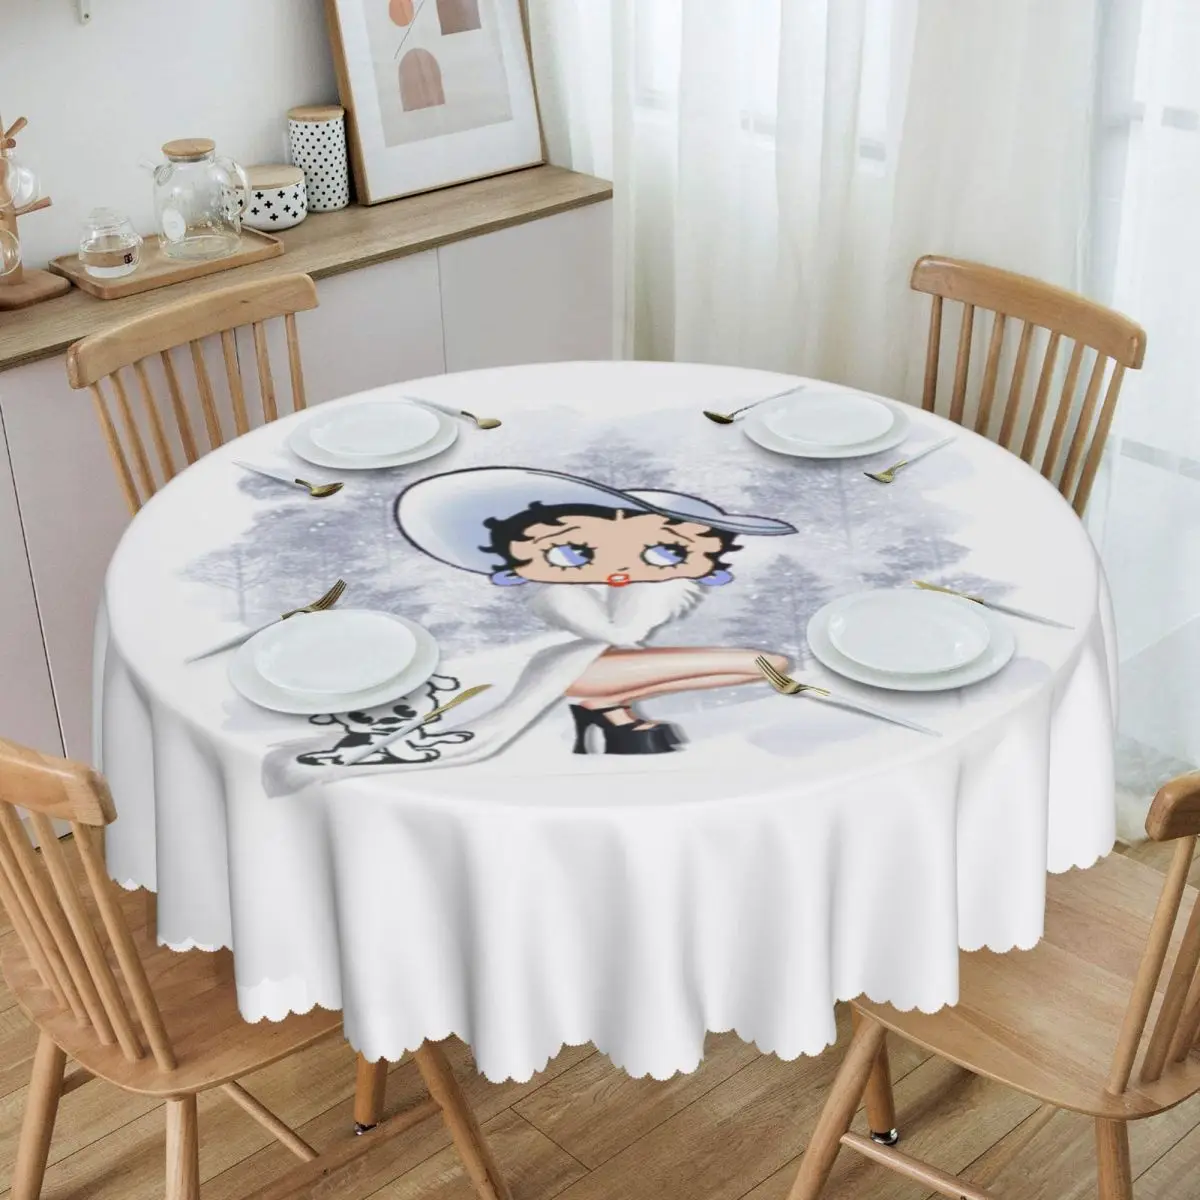 

Round Cartoon Graphic Bettys Boop Tablecloth Waterproof Oil-Proof Table Cover 60 inches Table Cloth